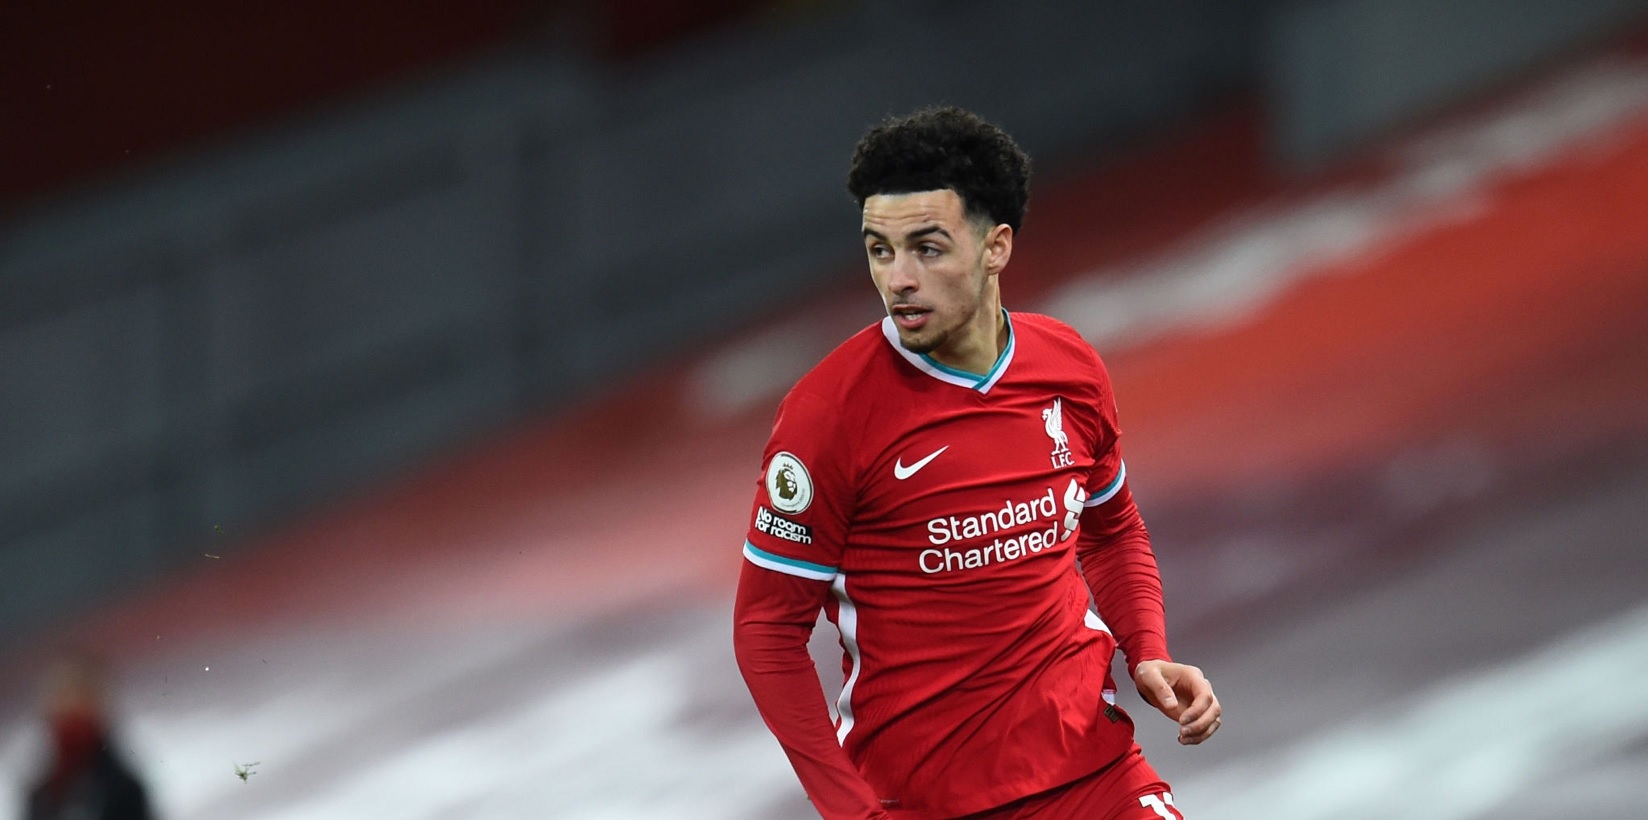 Pundit compares Liverpool star to Jack Grealish and suggests he would be a ‘coup’ signing for Aston Villa